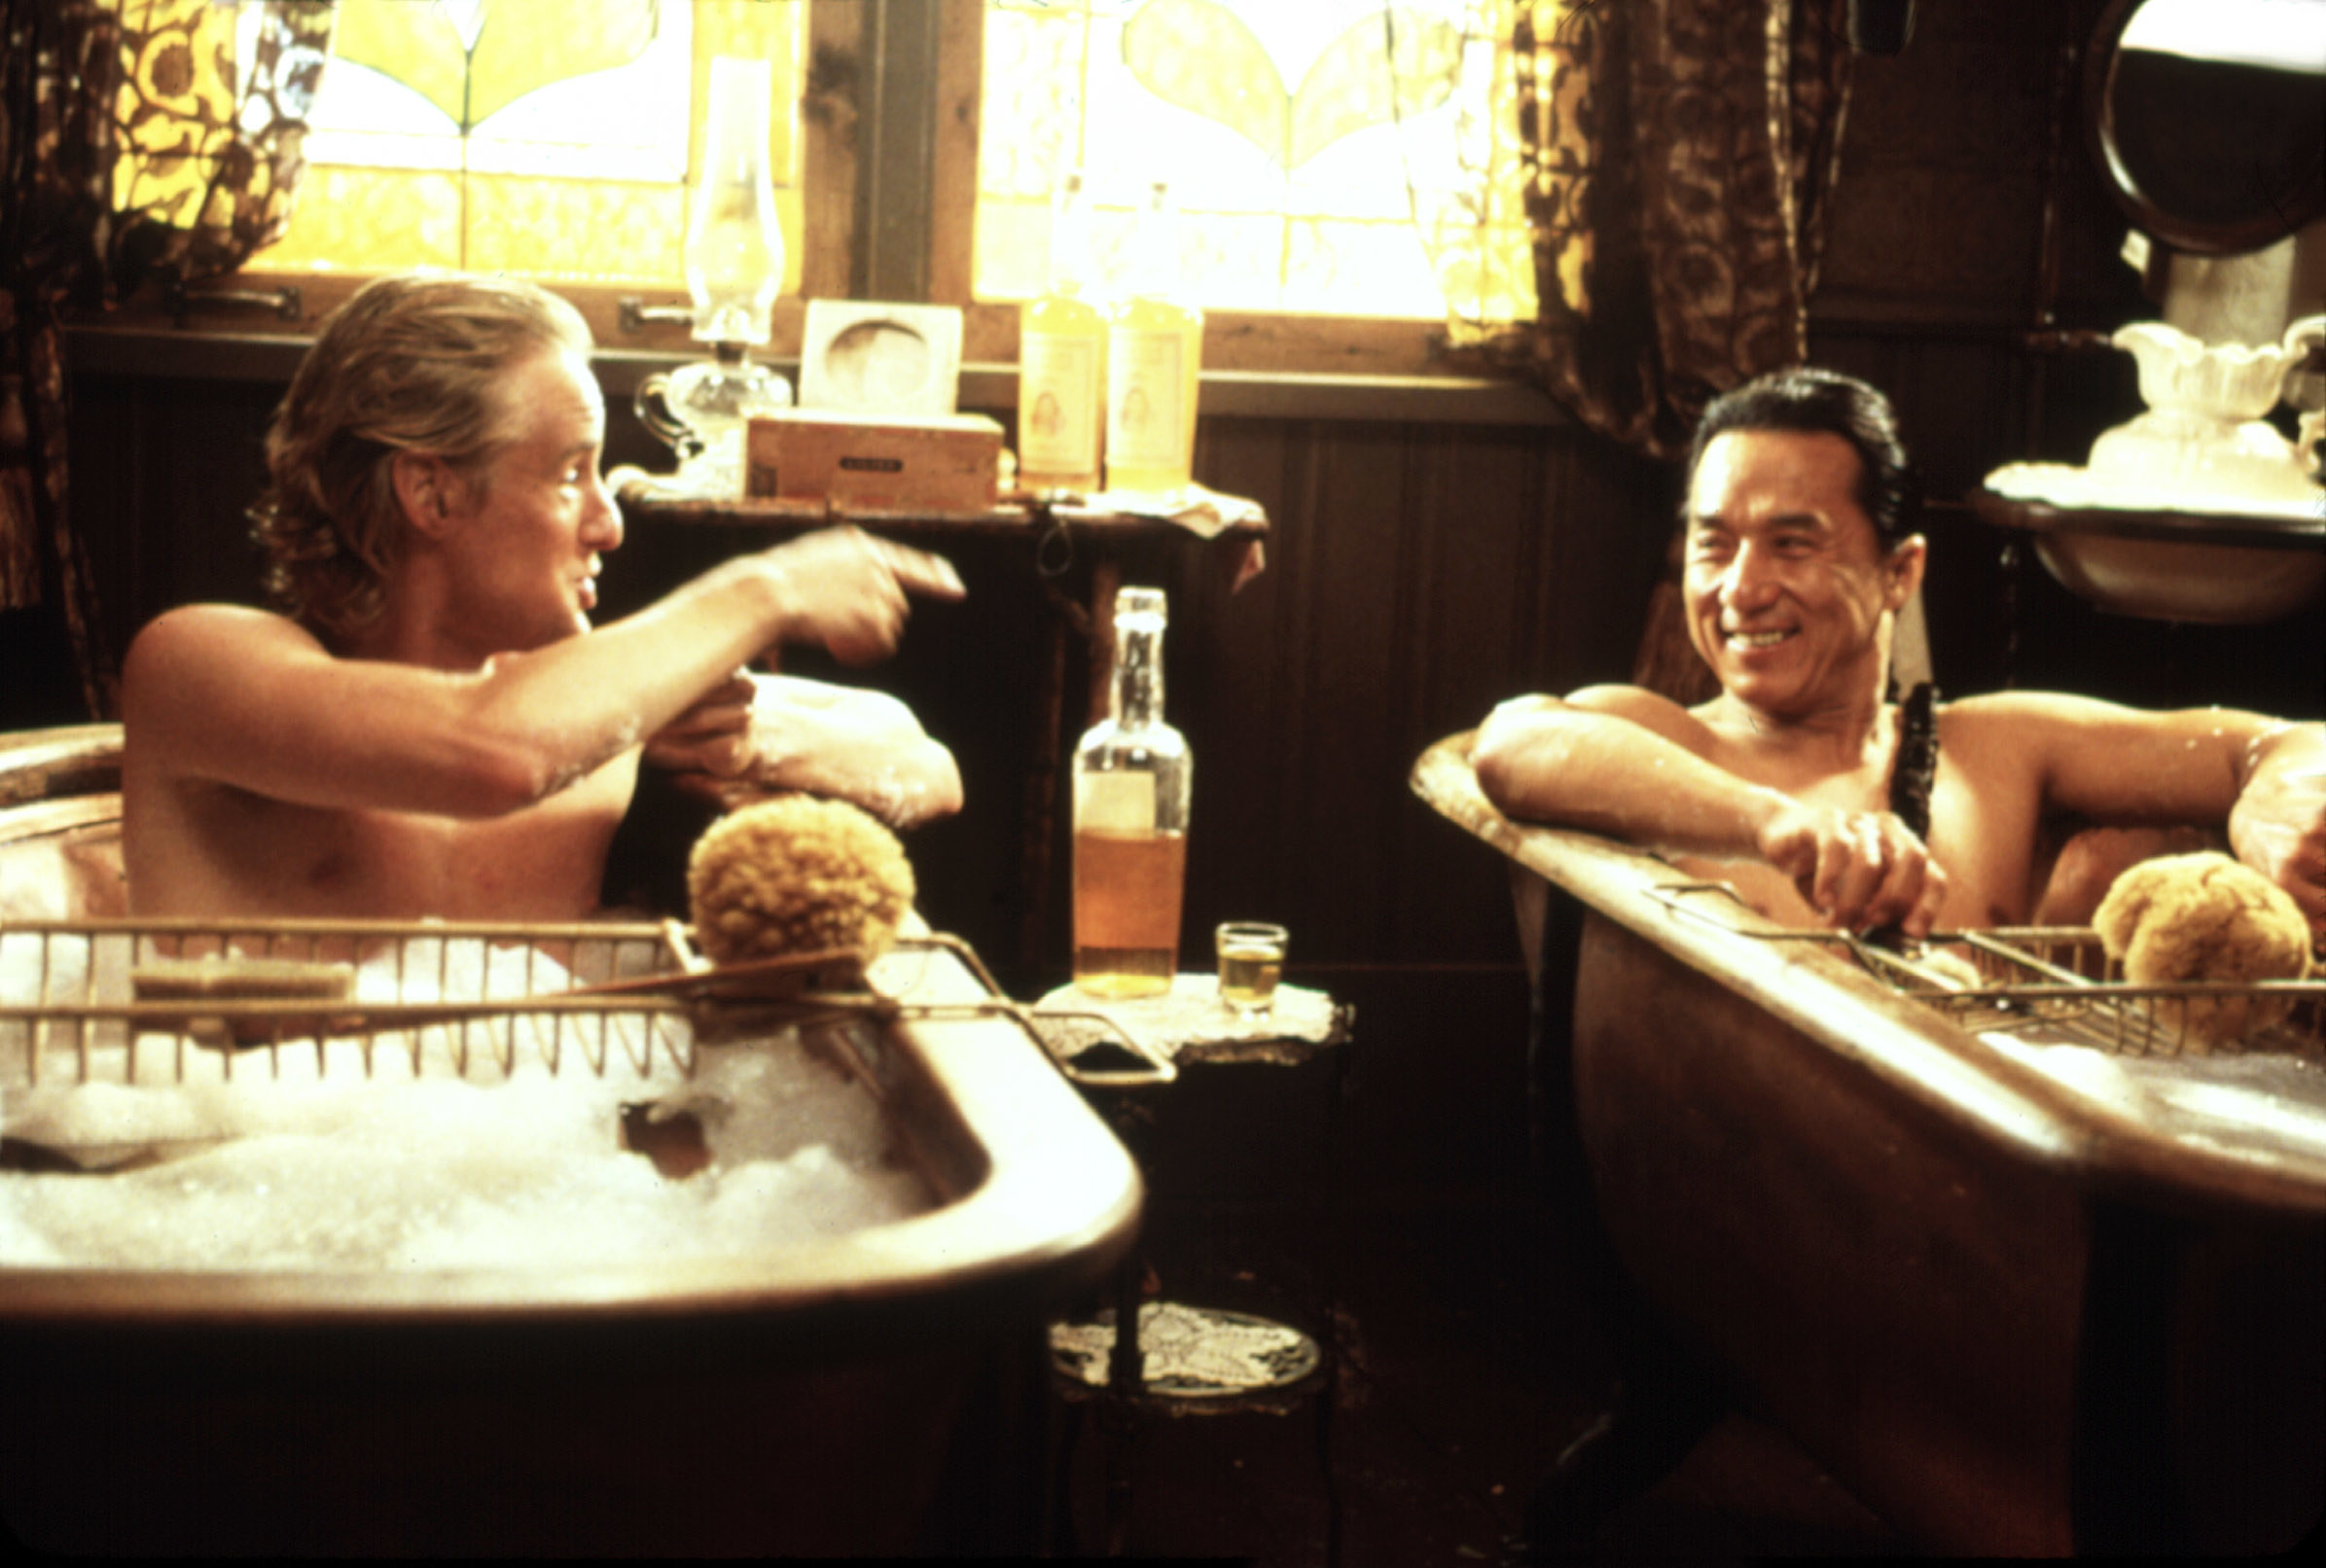 owen wilson and jackie chan drinking in a pair of bathtubs